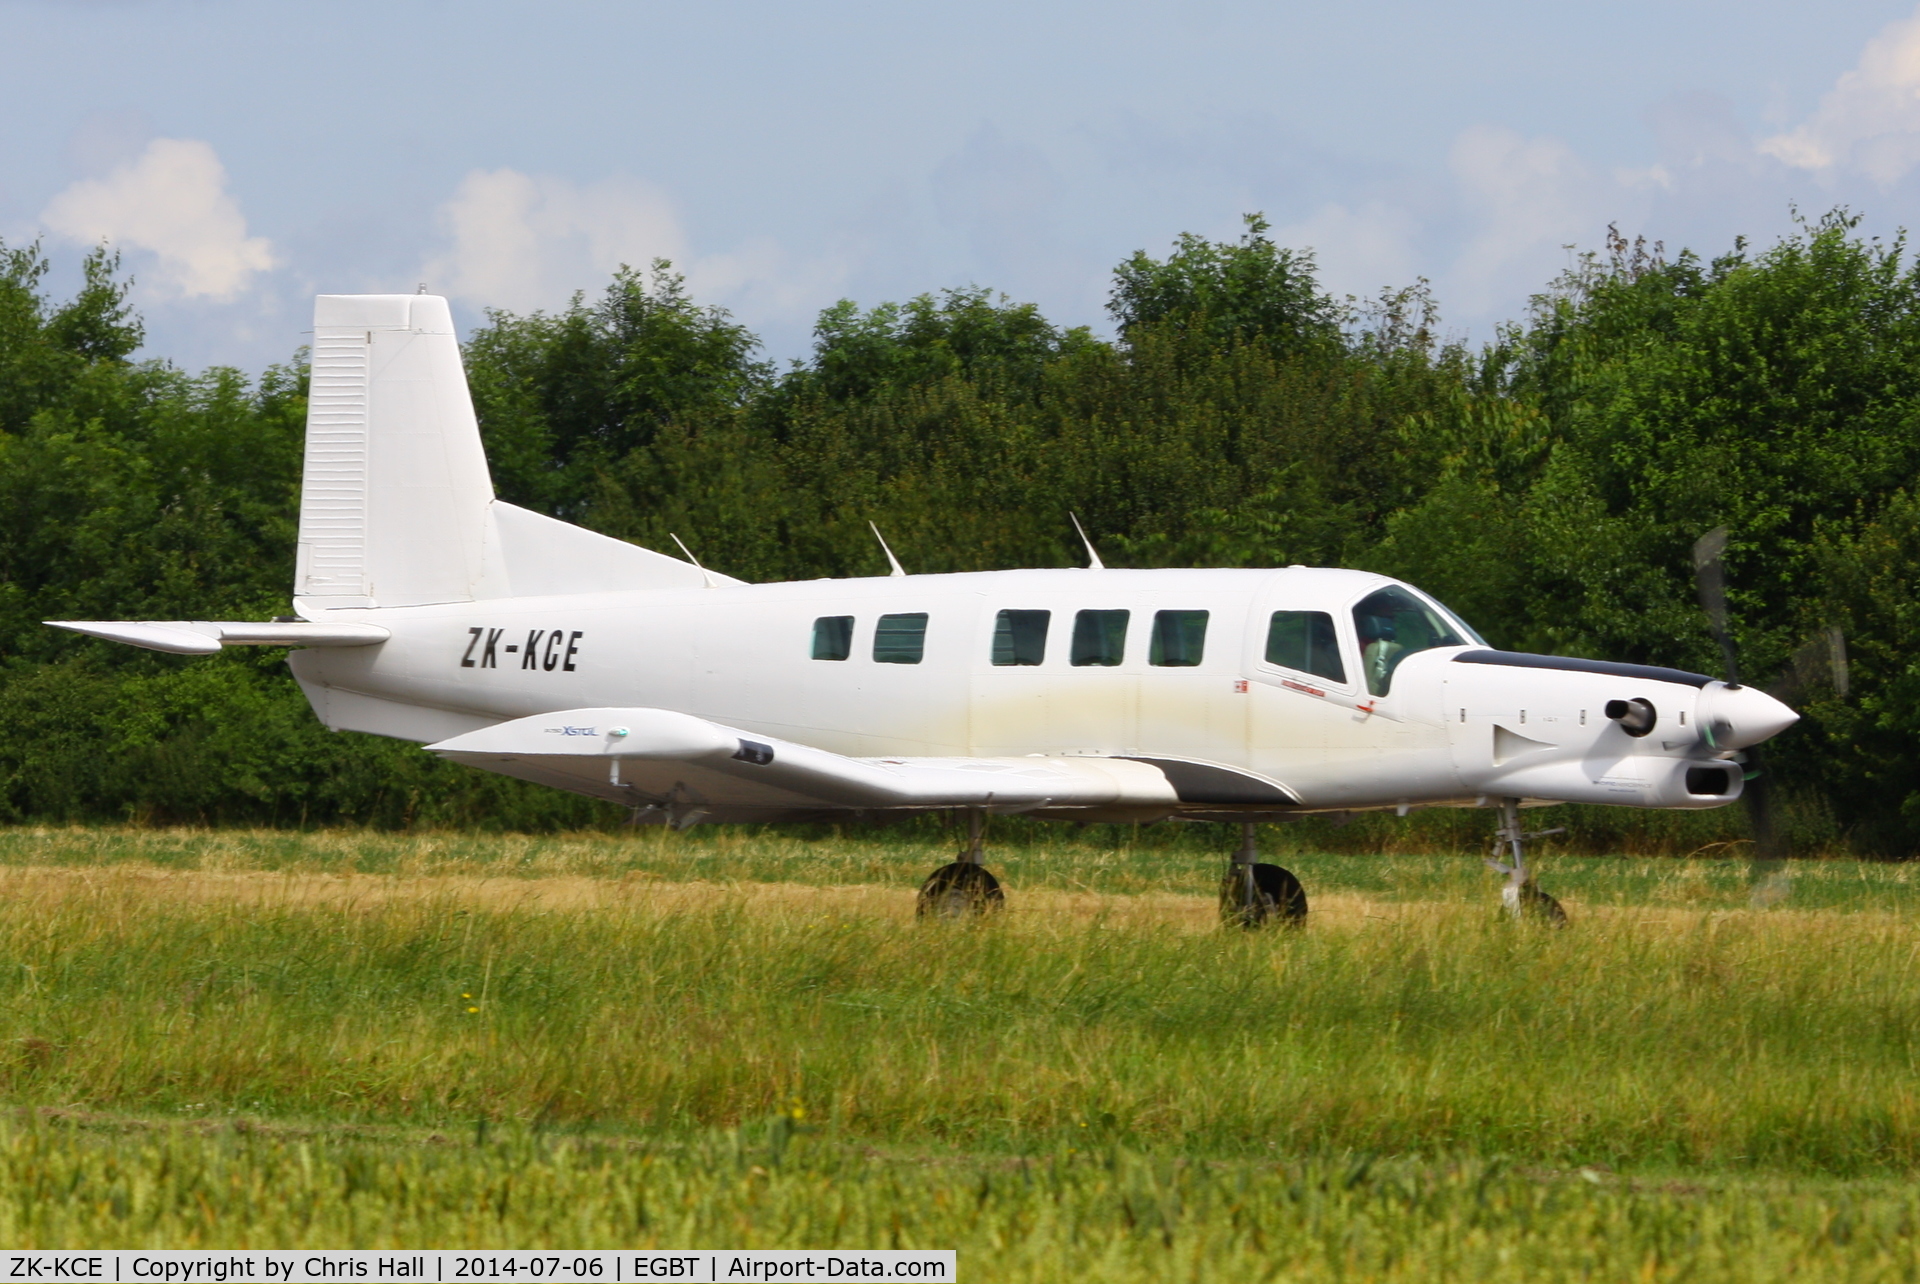 ZK-KCE, 2012 Pacific Aerospace 750XL C/N 185, visitor from nearby Hinton in the Hedges